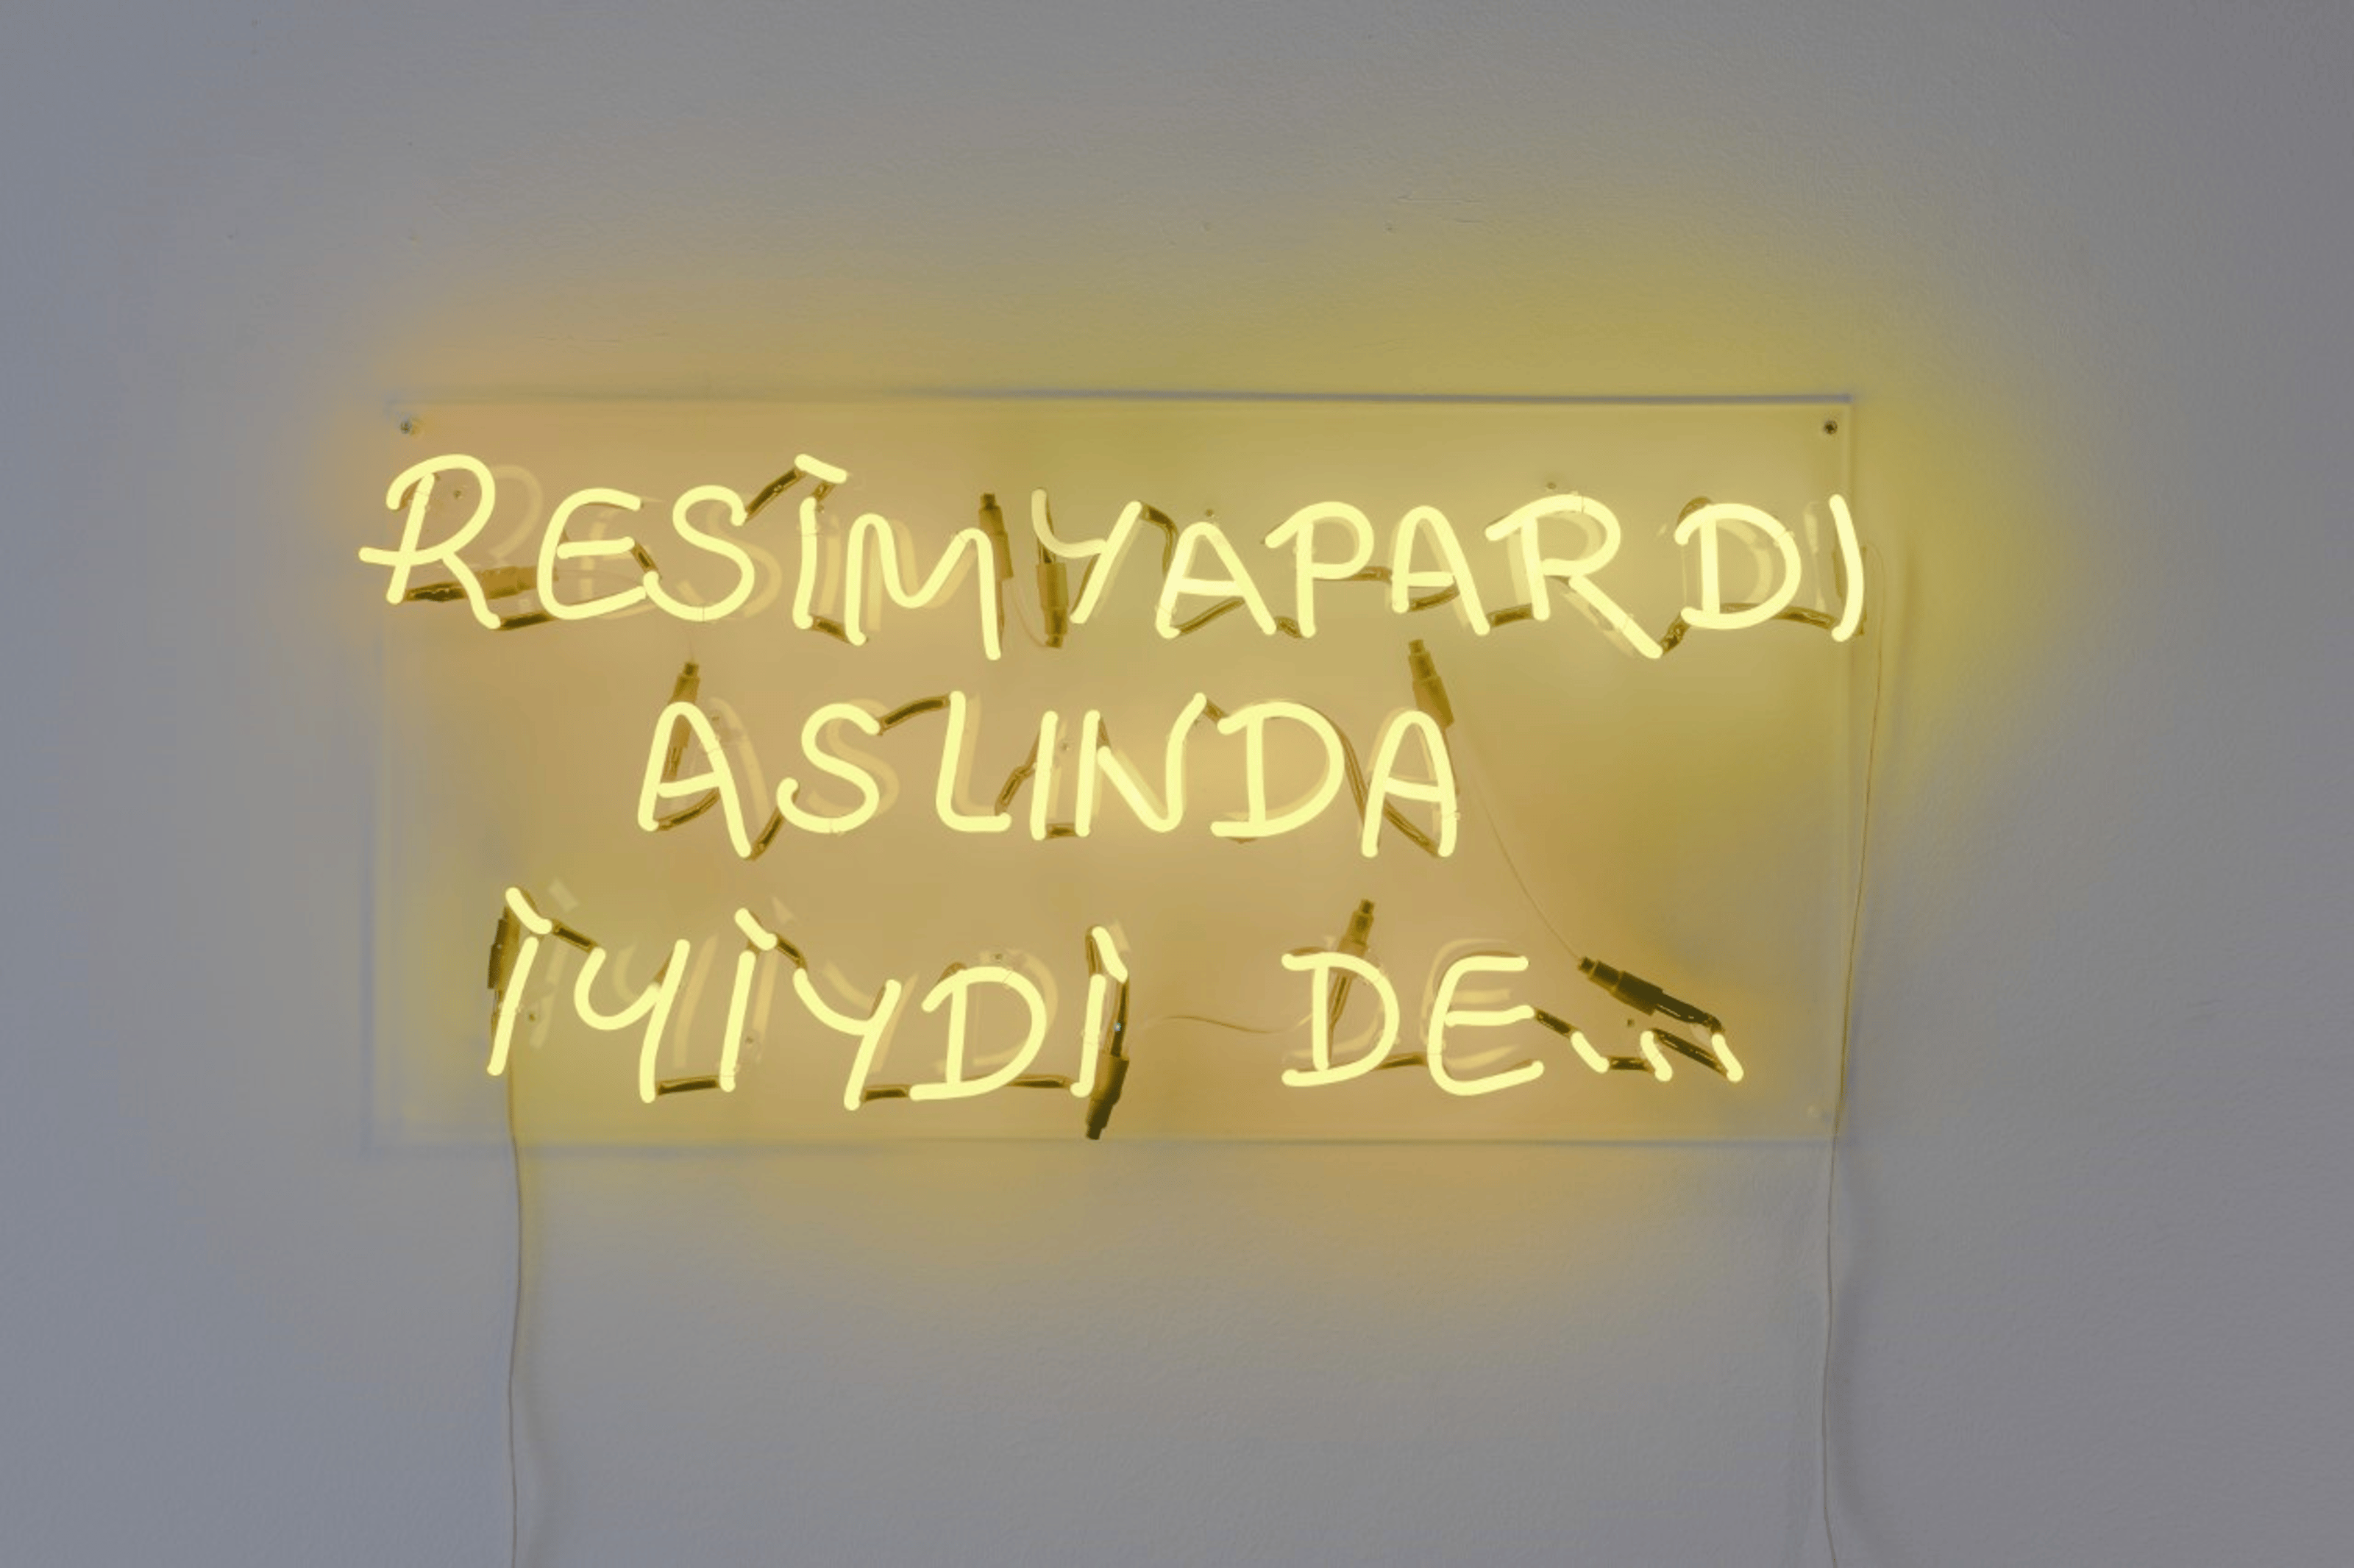 Ahmet Öğüt stands next to a neon work hanging on the wall in front of a group of museum visitors.